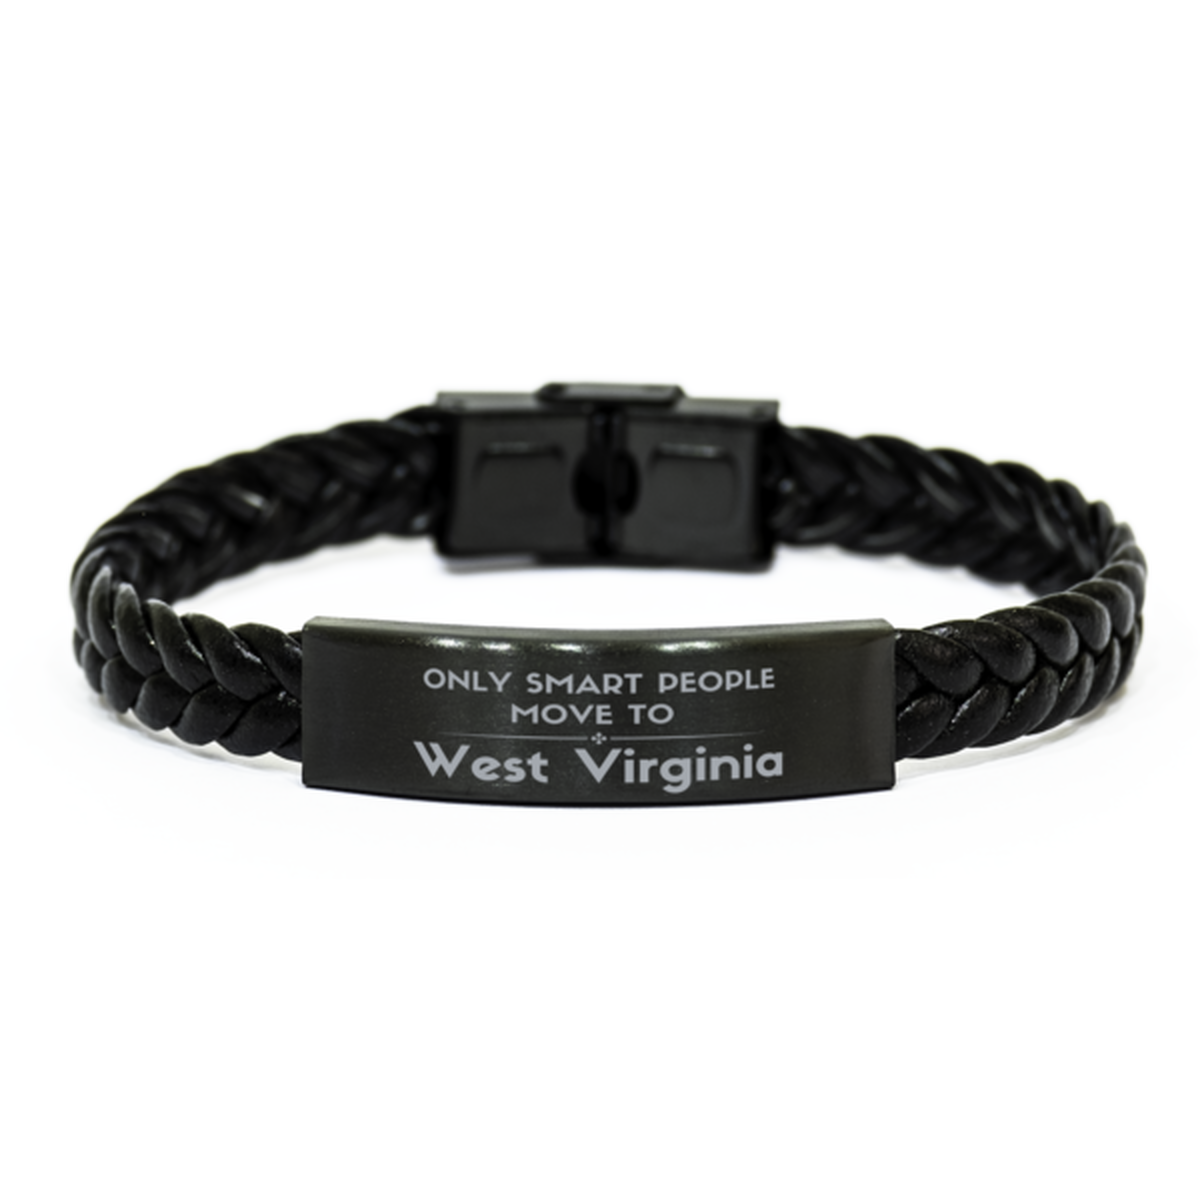 Only smart people move to West Virginia Braided Leather Bracelet, Gag Gifts For West Virginia, Move to West Virginia Gifts for Friends Coworker Funny Saying Quote